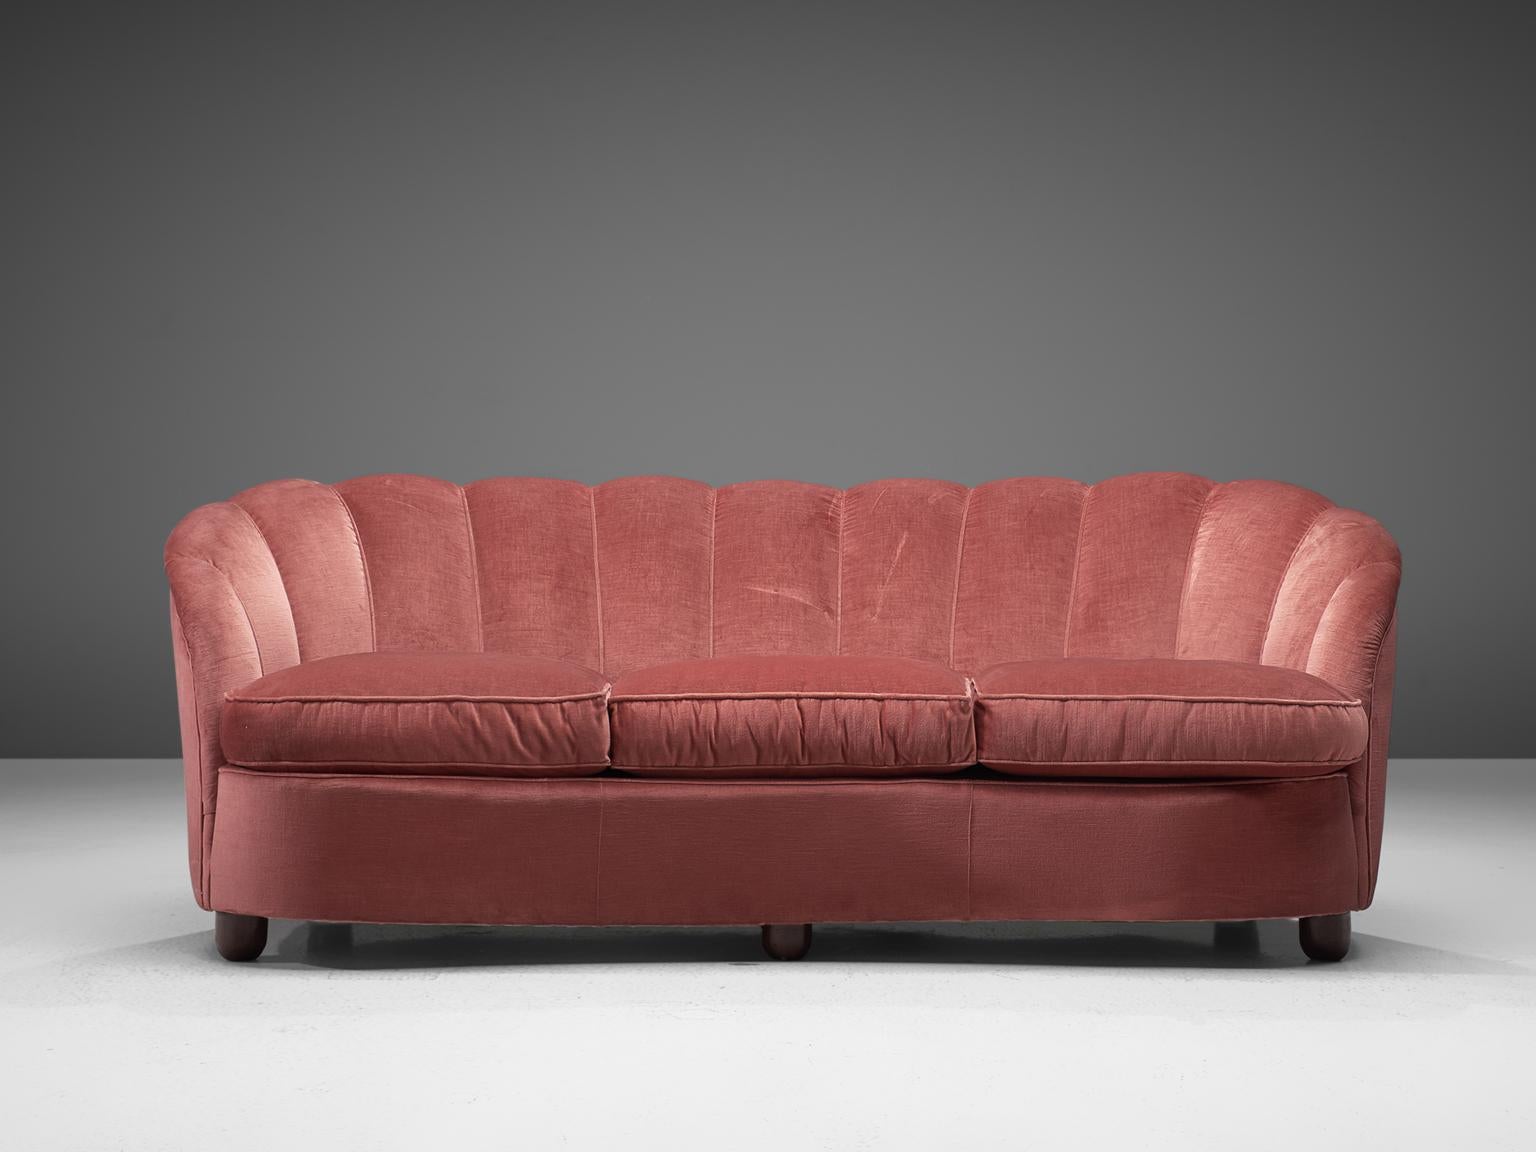 Sofa, pink velvet and oak, Italy, 1960s. 

This ornate, cute but grand comfortable sofa is strong and playful at the same time. The webbed back gives perfect support for the sitter. The thick seat with removable cushion creates a nice balance